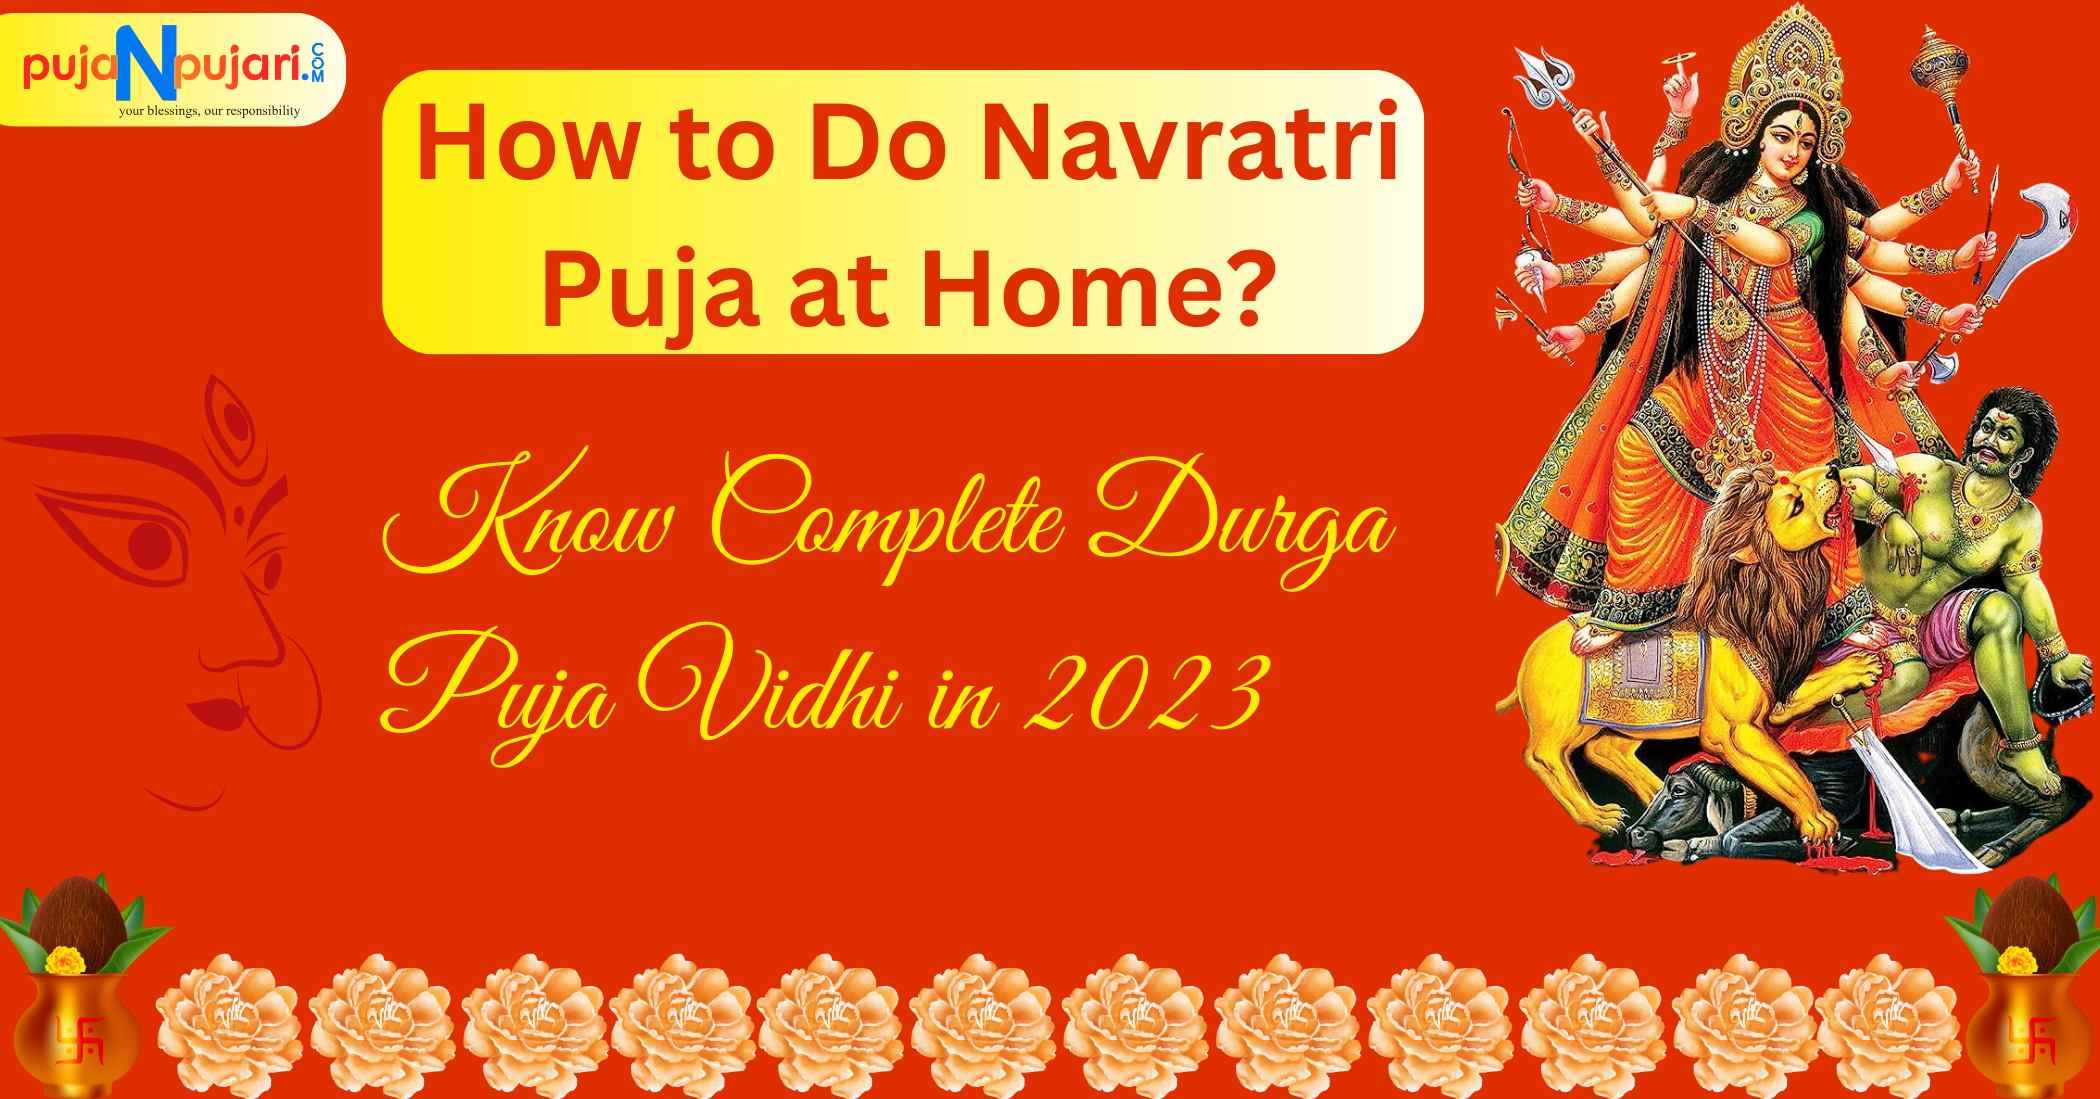 Get the Complete Guide to Navratri Puja Vidhi: Step-By-Step Durga Puja